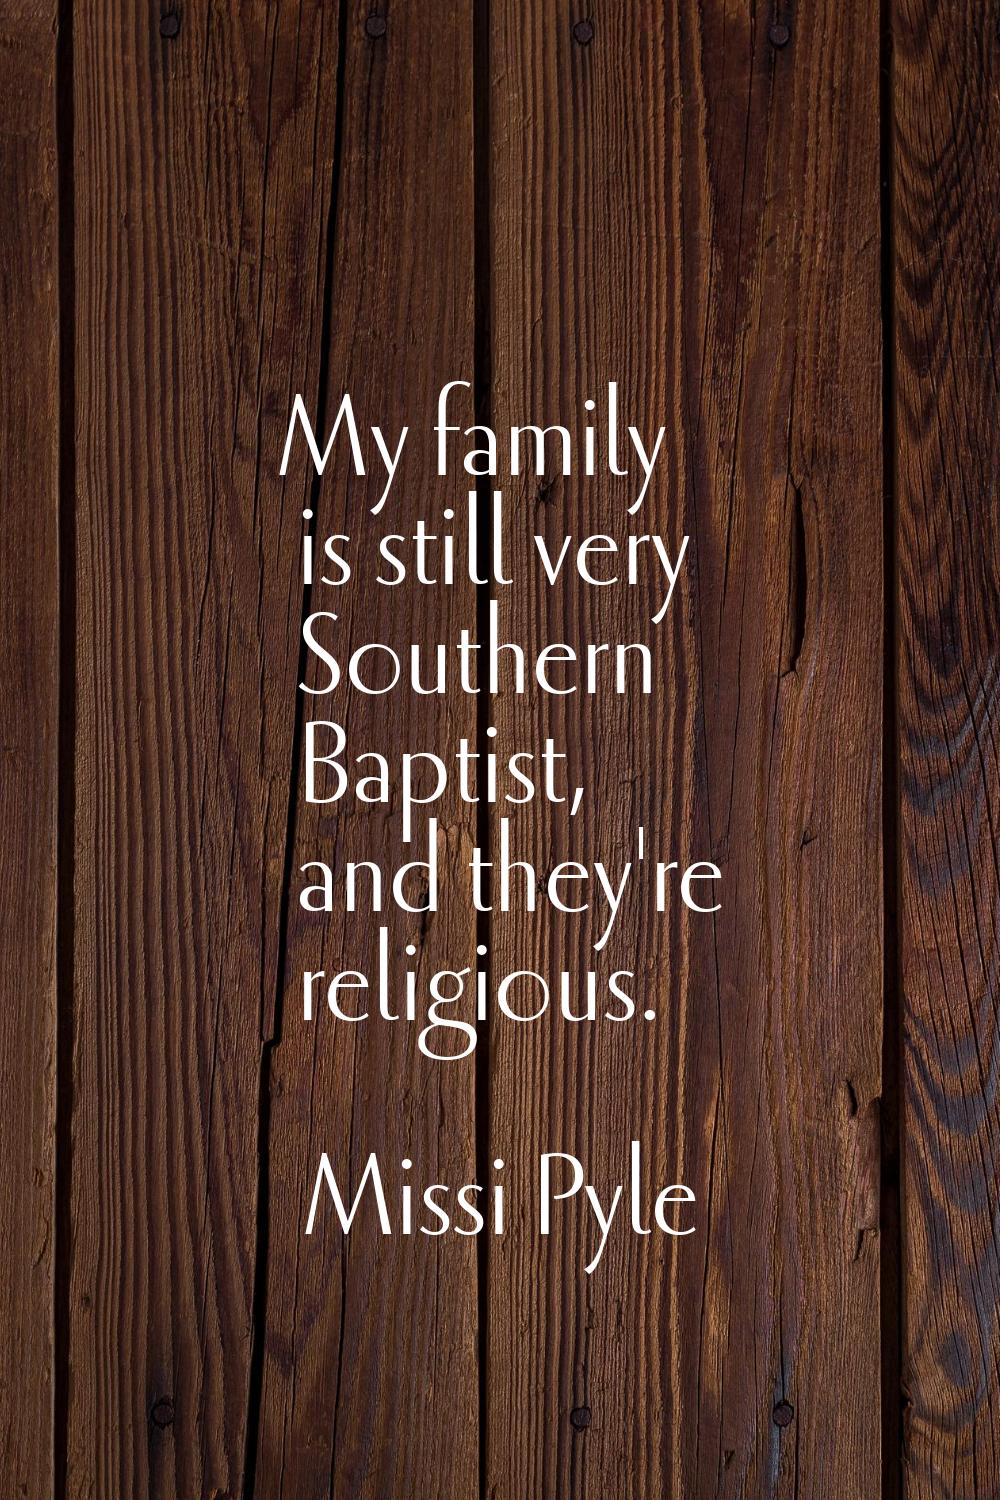 My family is still very Southern Baptist, and they're religious.